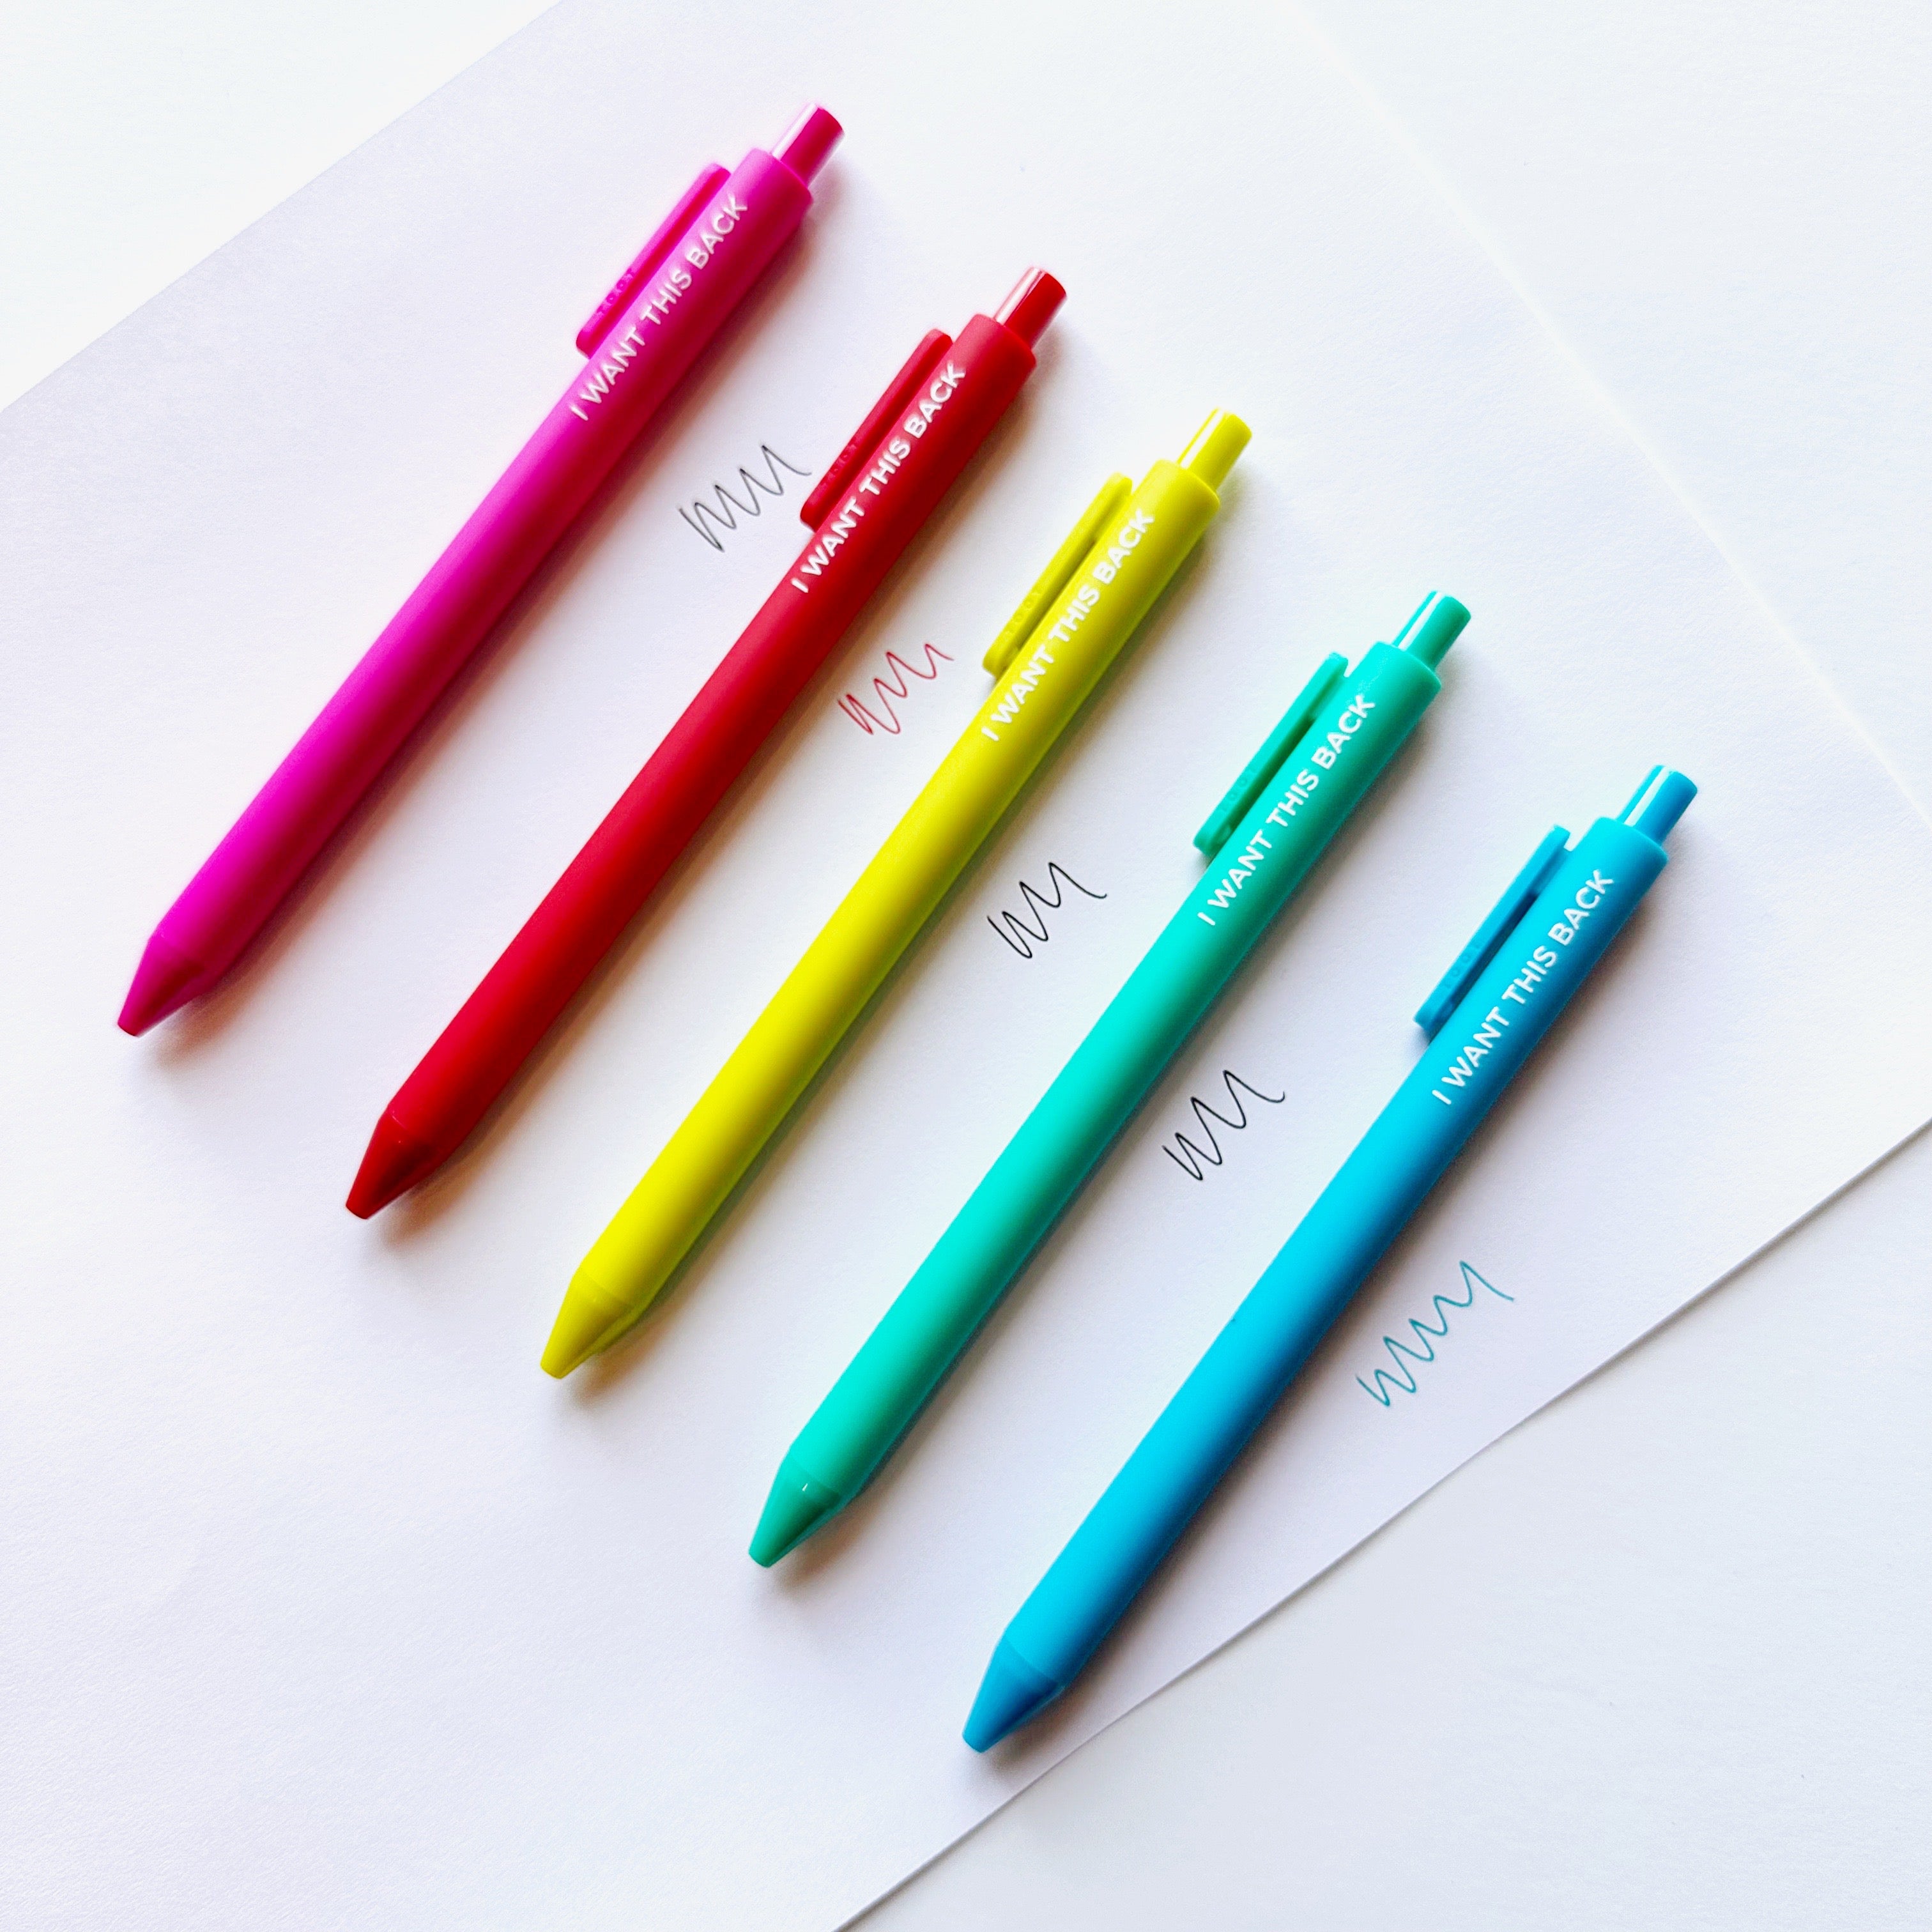 Image of five pens in pink, red, citron, aqua, and blue with white text says, "I want this back".